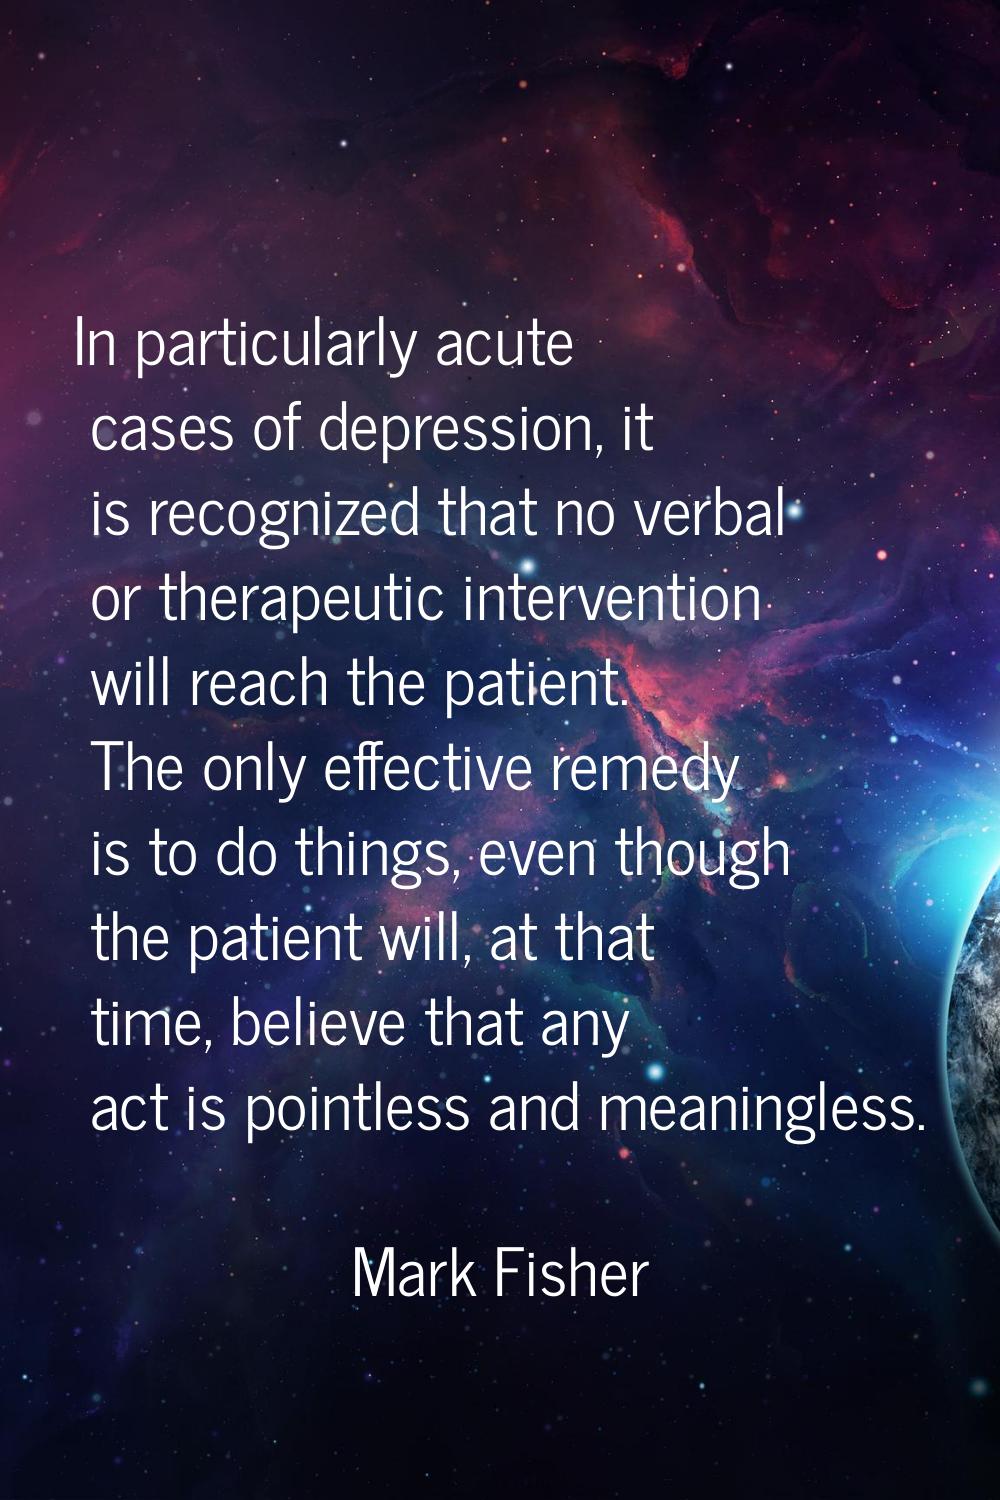 In particularly acute cases of depression, it is recognized that no verbal or therapeutic intervent